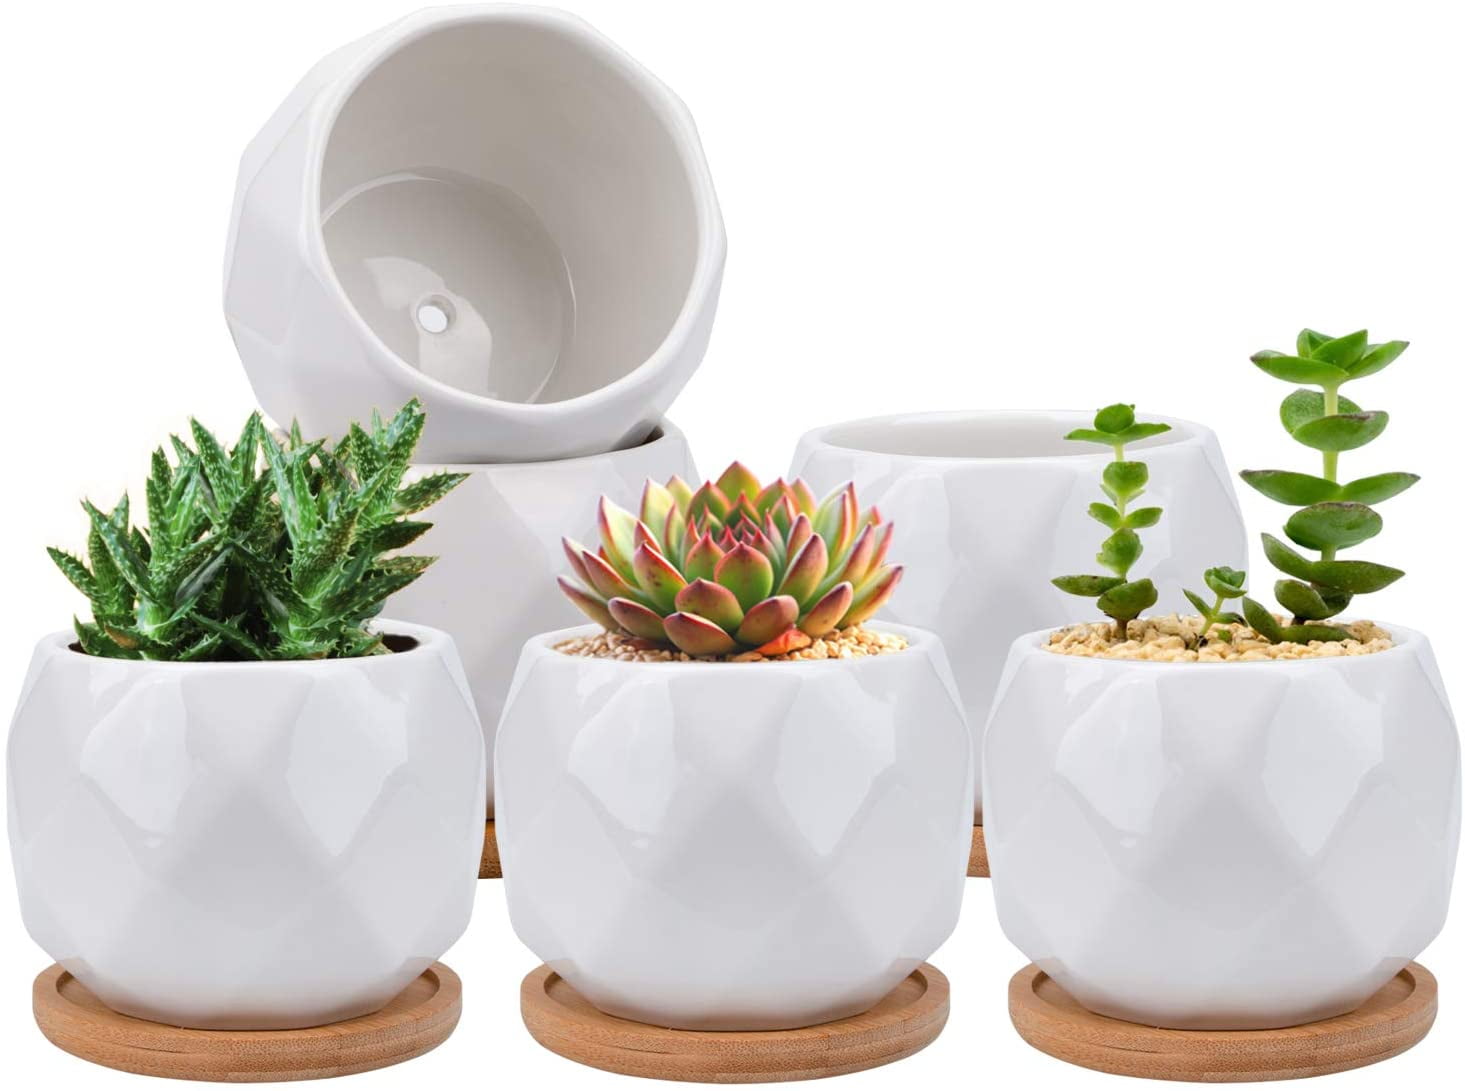 Windowsill and Office Decor（Plants Not Included） White Mini Decorative Succulent Pots with Bamboo Tray 4 Pack Succulent Pots Ceramic Flower Planter Pots with Drainage Holes Great for Home 